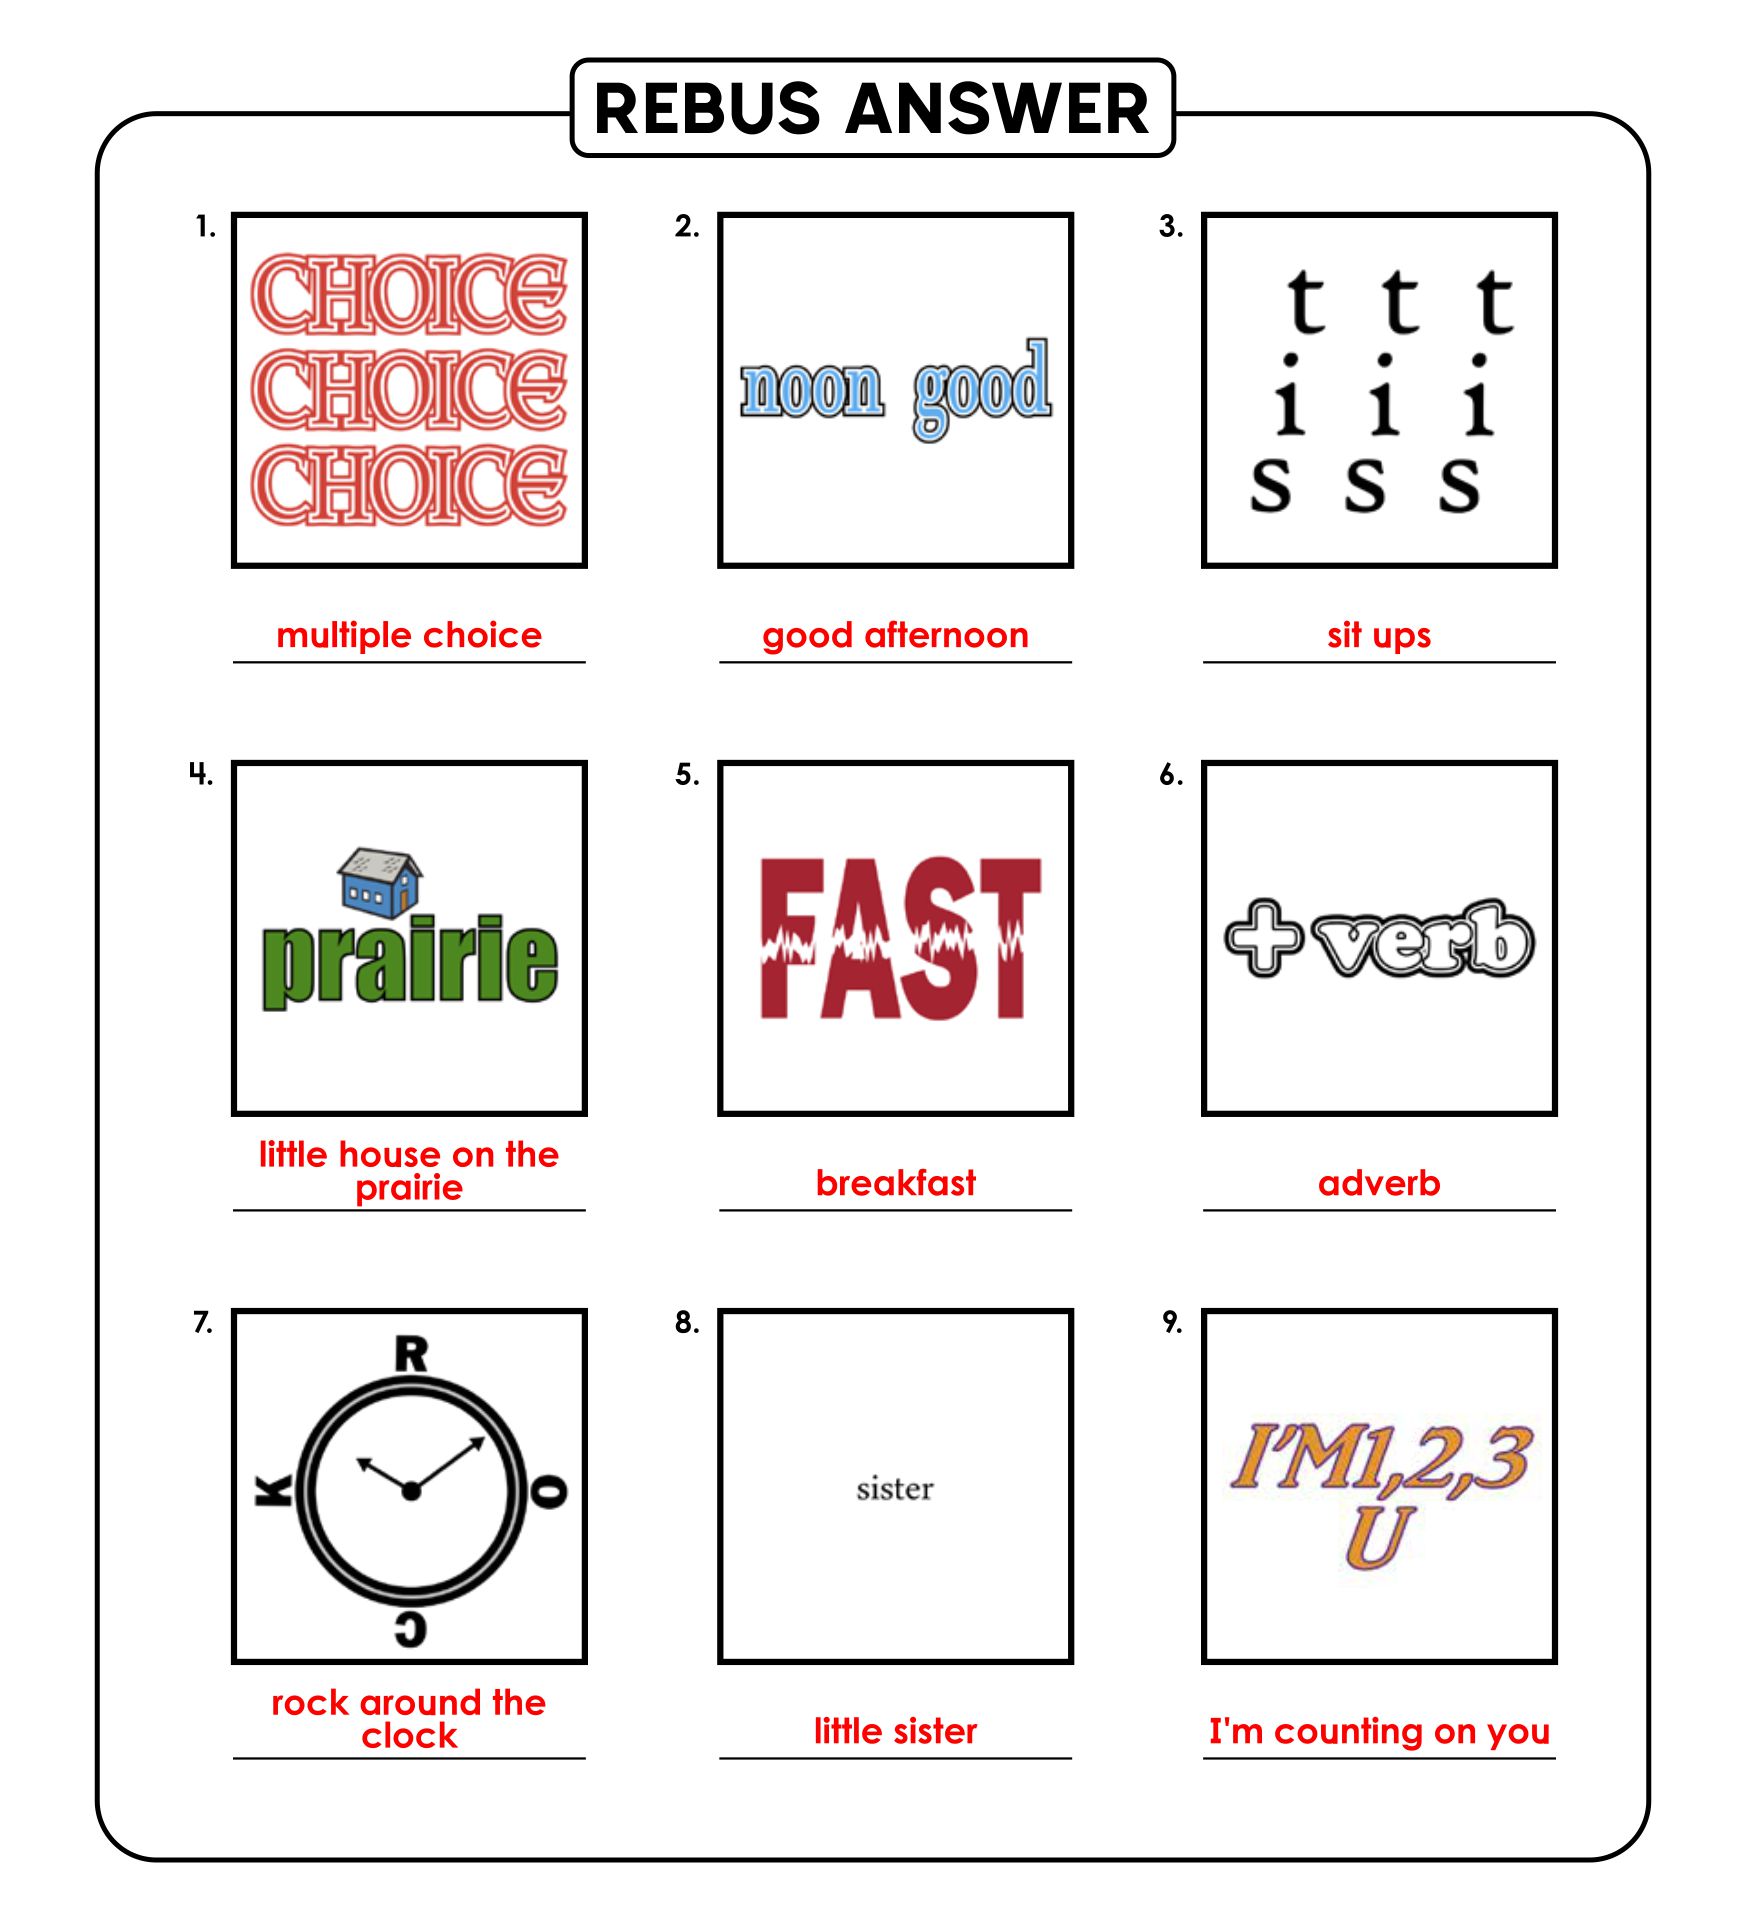 rebus puzzles and answers